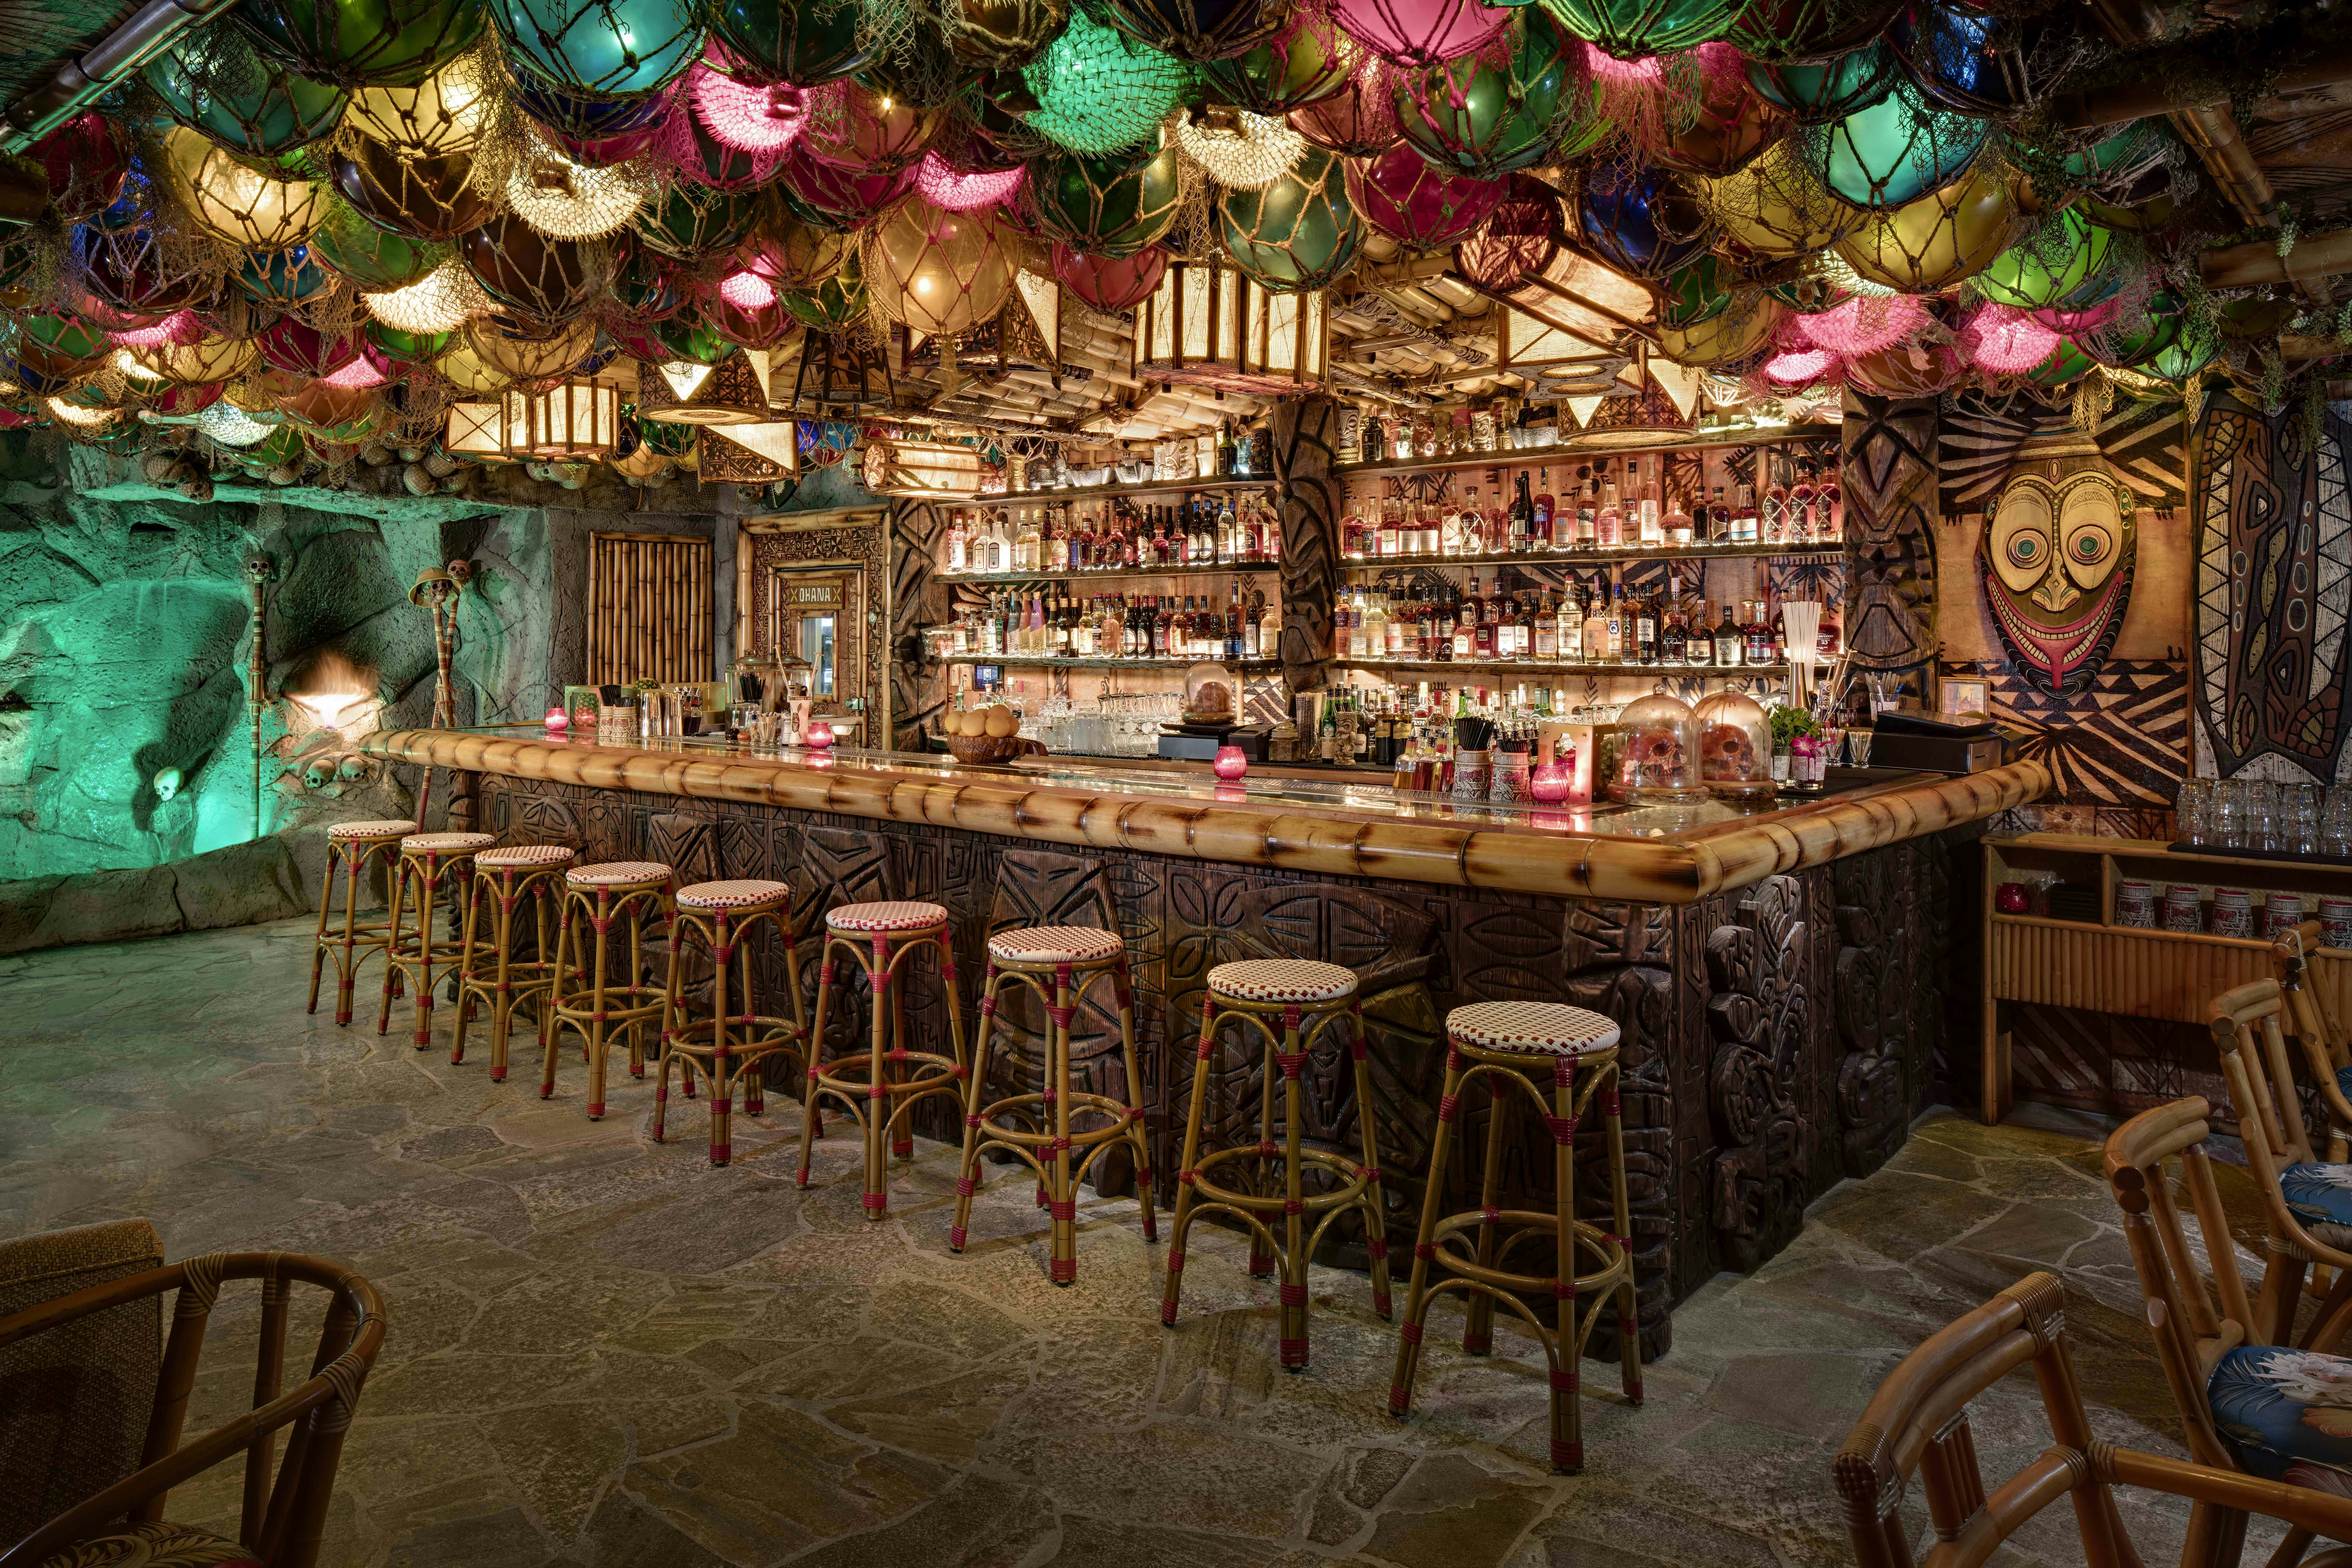 Ratan stools line up in front a bar whose front and sides are made up of dark wood carved tiki motifs and the top is like a large piece of bamboo. Colorful glass fishing floats in sisal nets hang from the ceiling. In the left corner is a faux cave wall decorated with skulls and a pith helmet